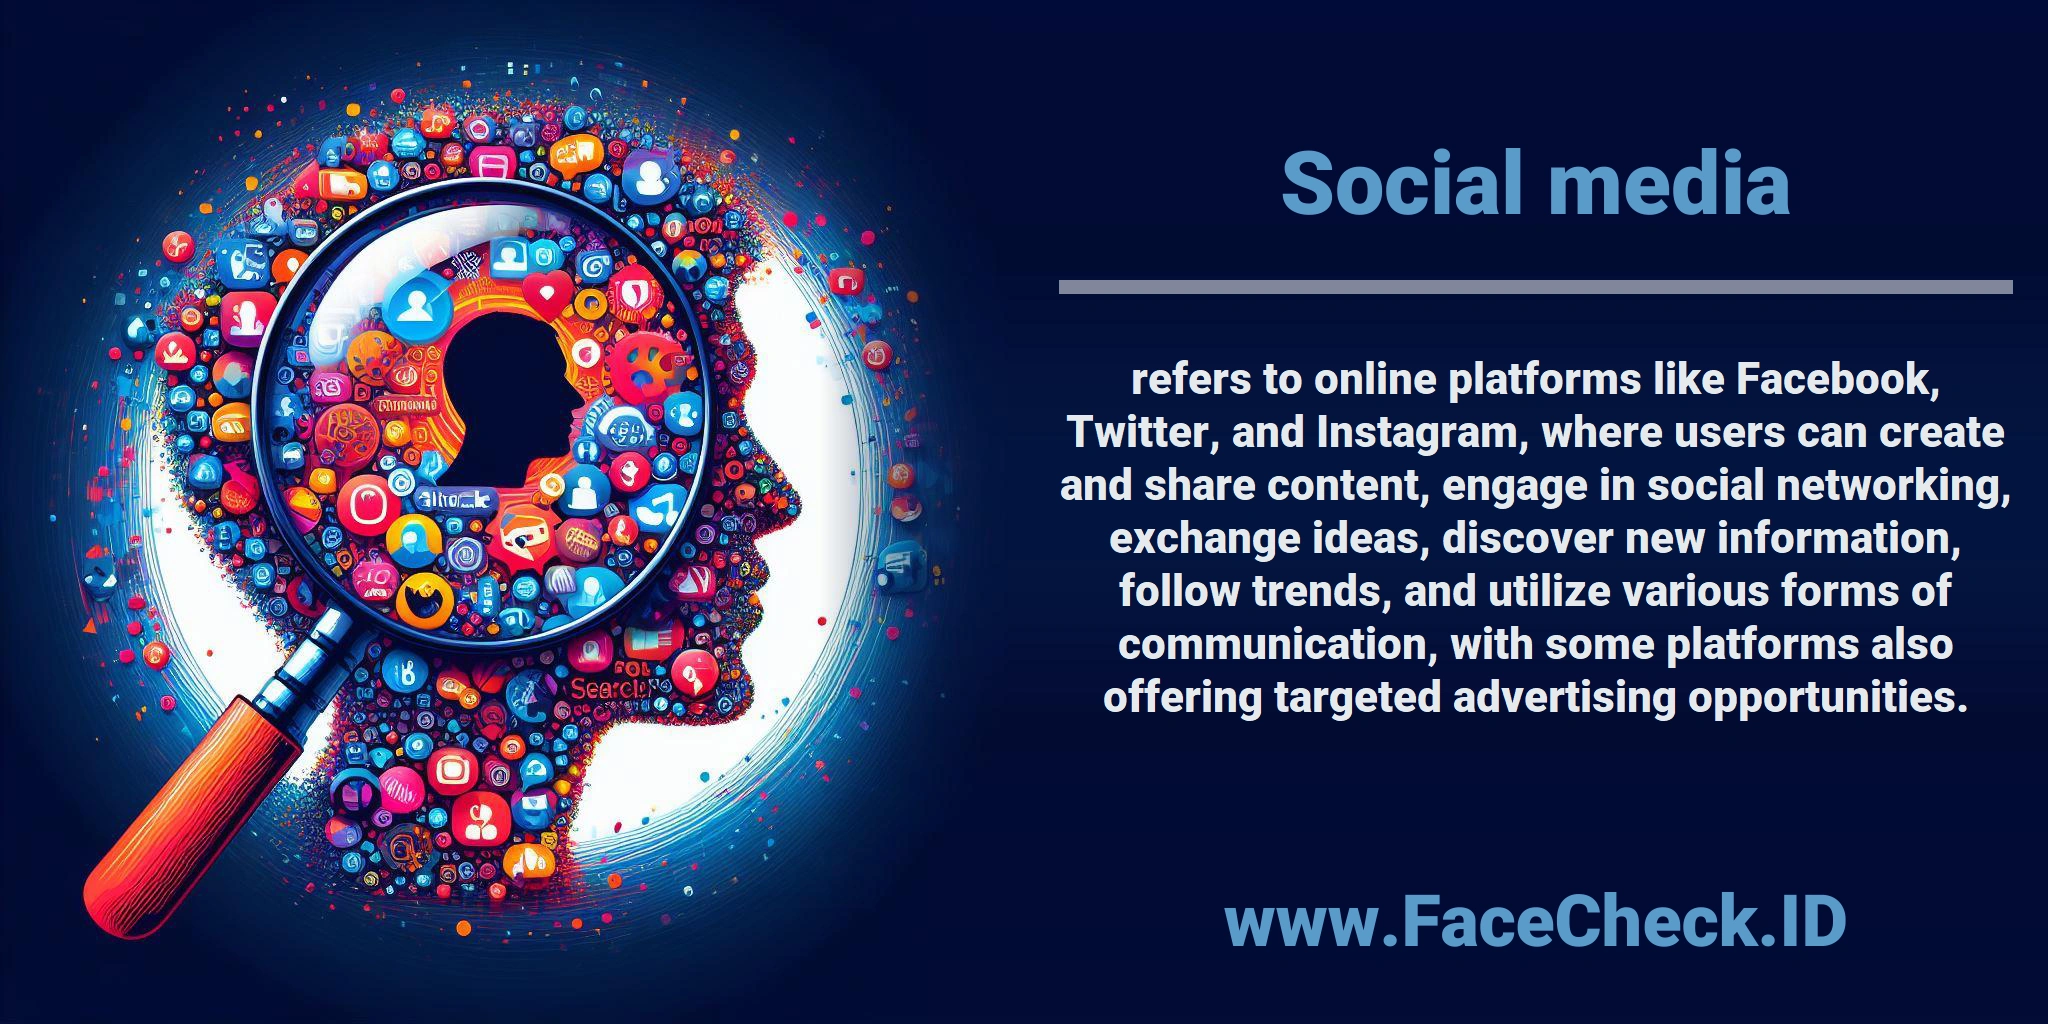 <b>Social media</b> refers to online platforms like Facebook, Twitter, and Instagram, where users can create and share content, engage in social networking, exchange ideas, discover new information, follow trends, and utilize various forms of communication, with some platforms also offering targeted advertising opportunities.